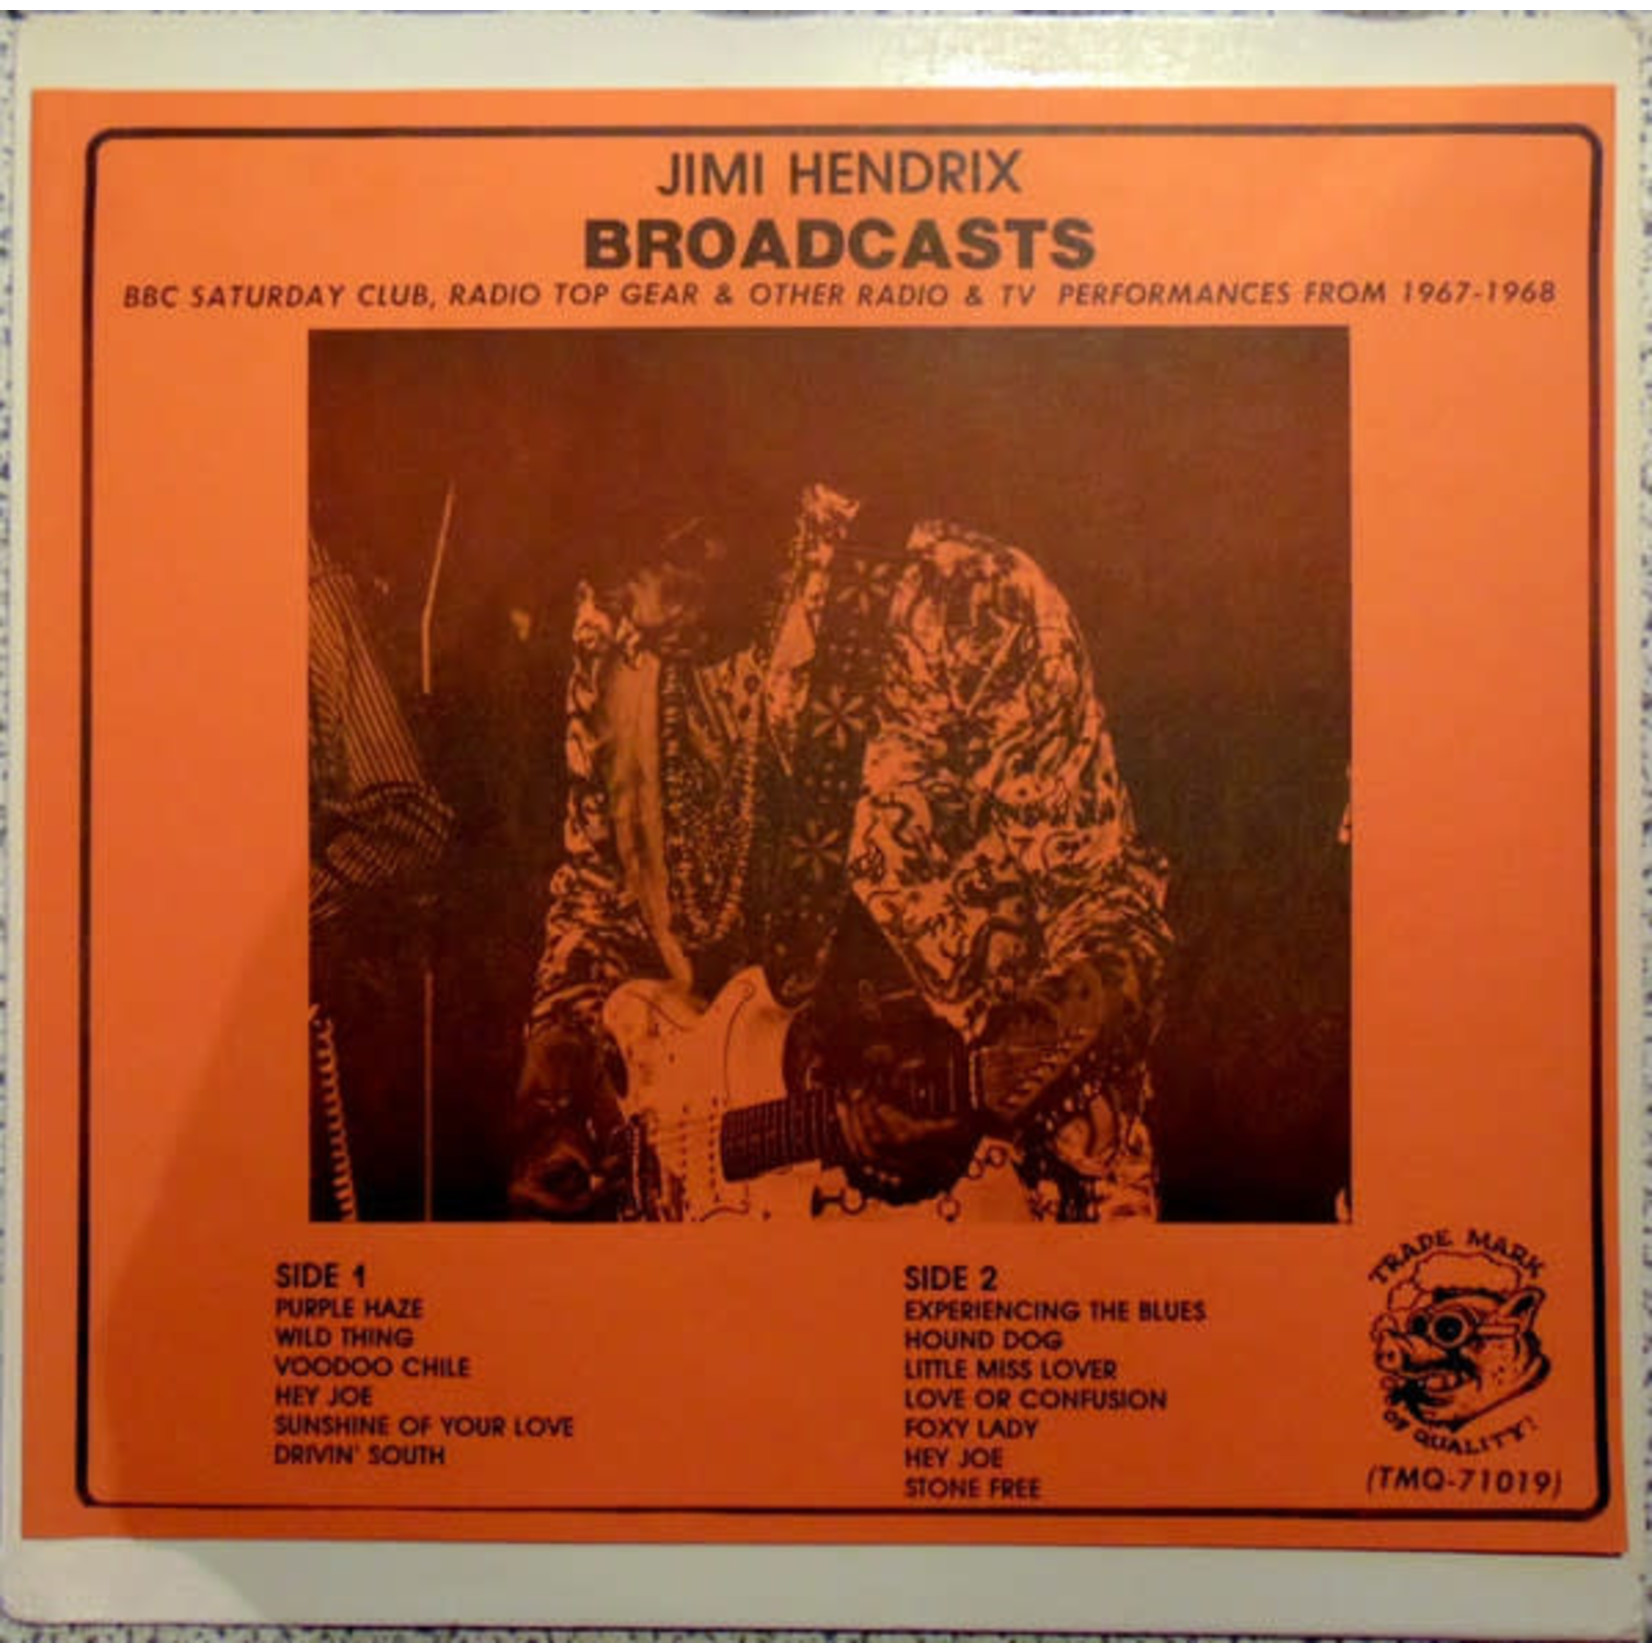 [Kollectibles] Jimi Hendrix - Broadcasts (1970 US, Unofficial Live, coloured vinyl, Disc VG+)